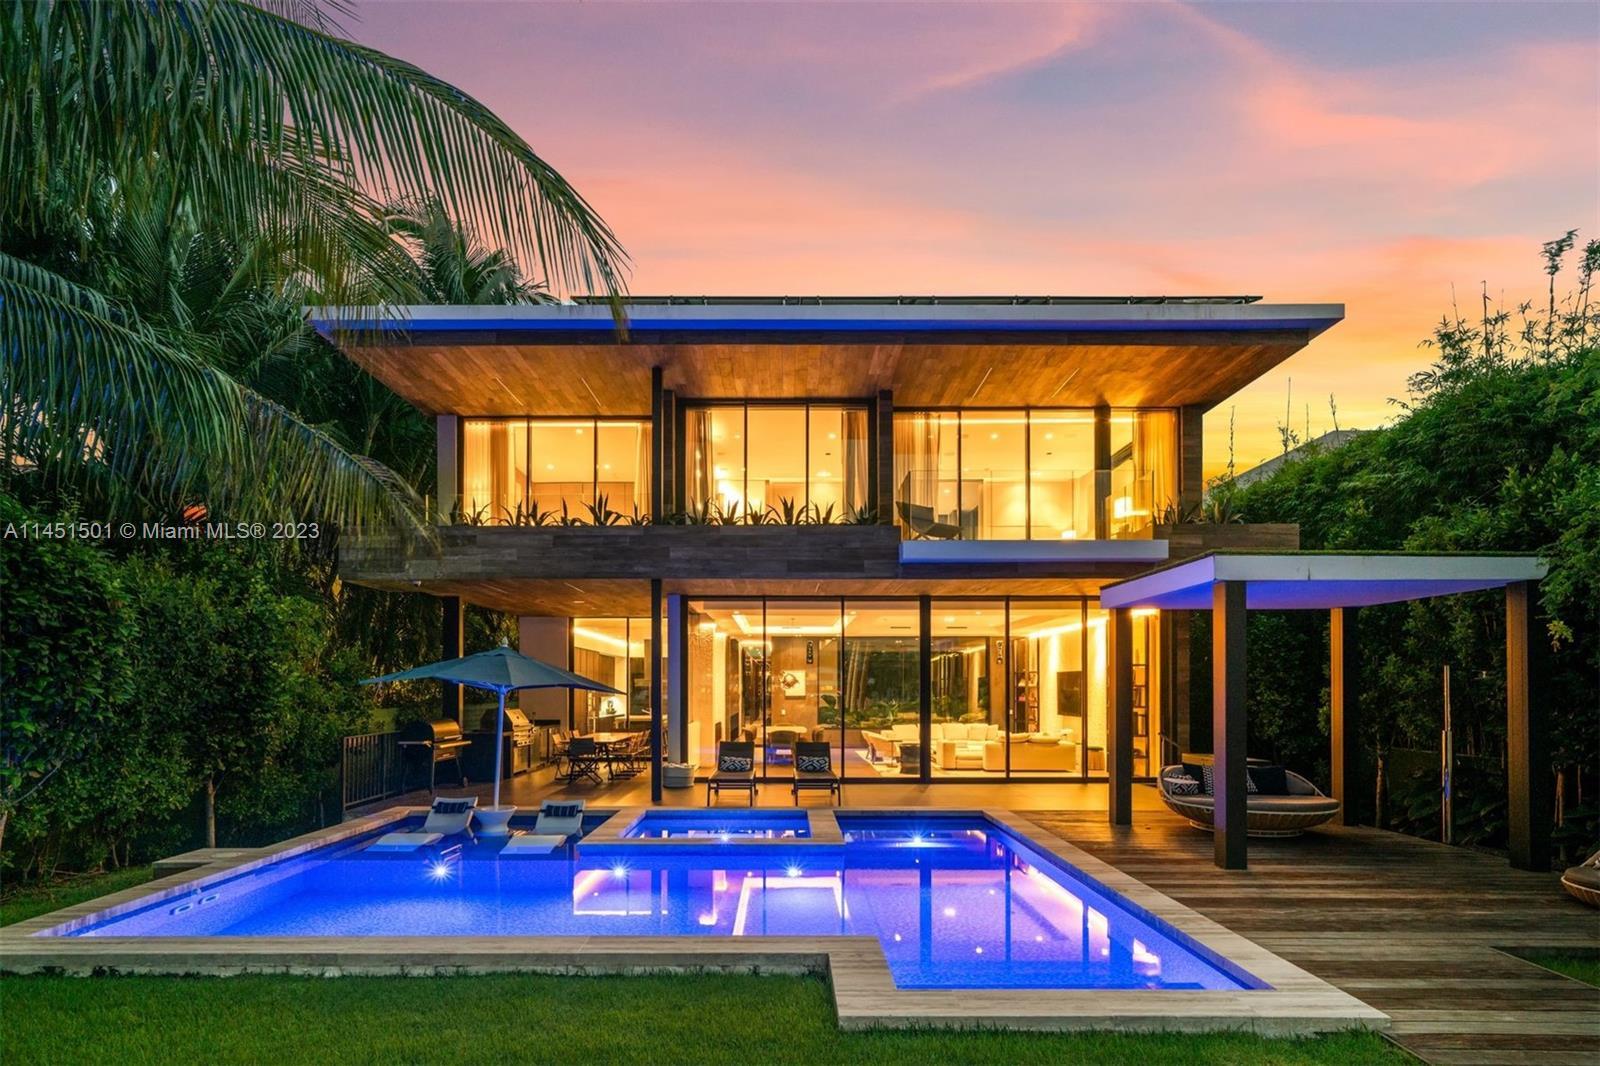 Embrace a modern, tropical lifestyle on the Venetian Islands in this elegant, solar-powered home des